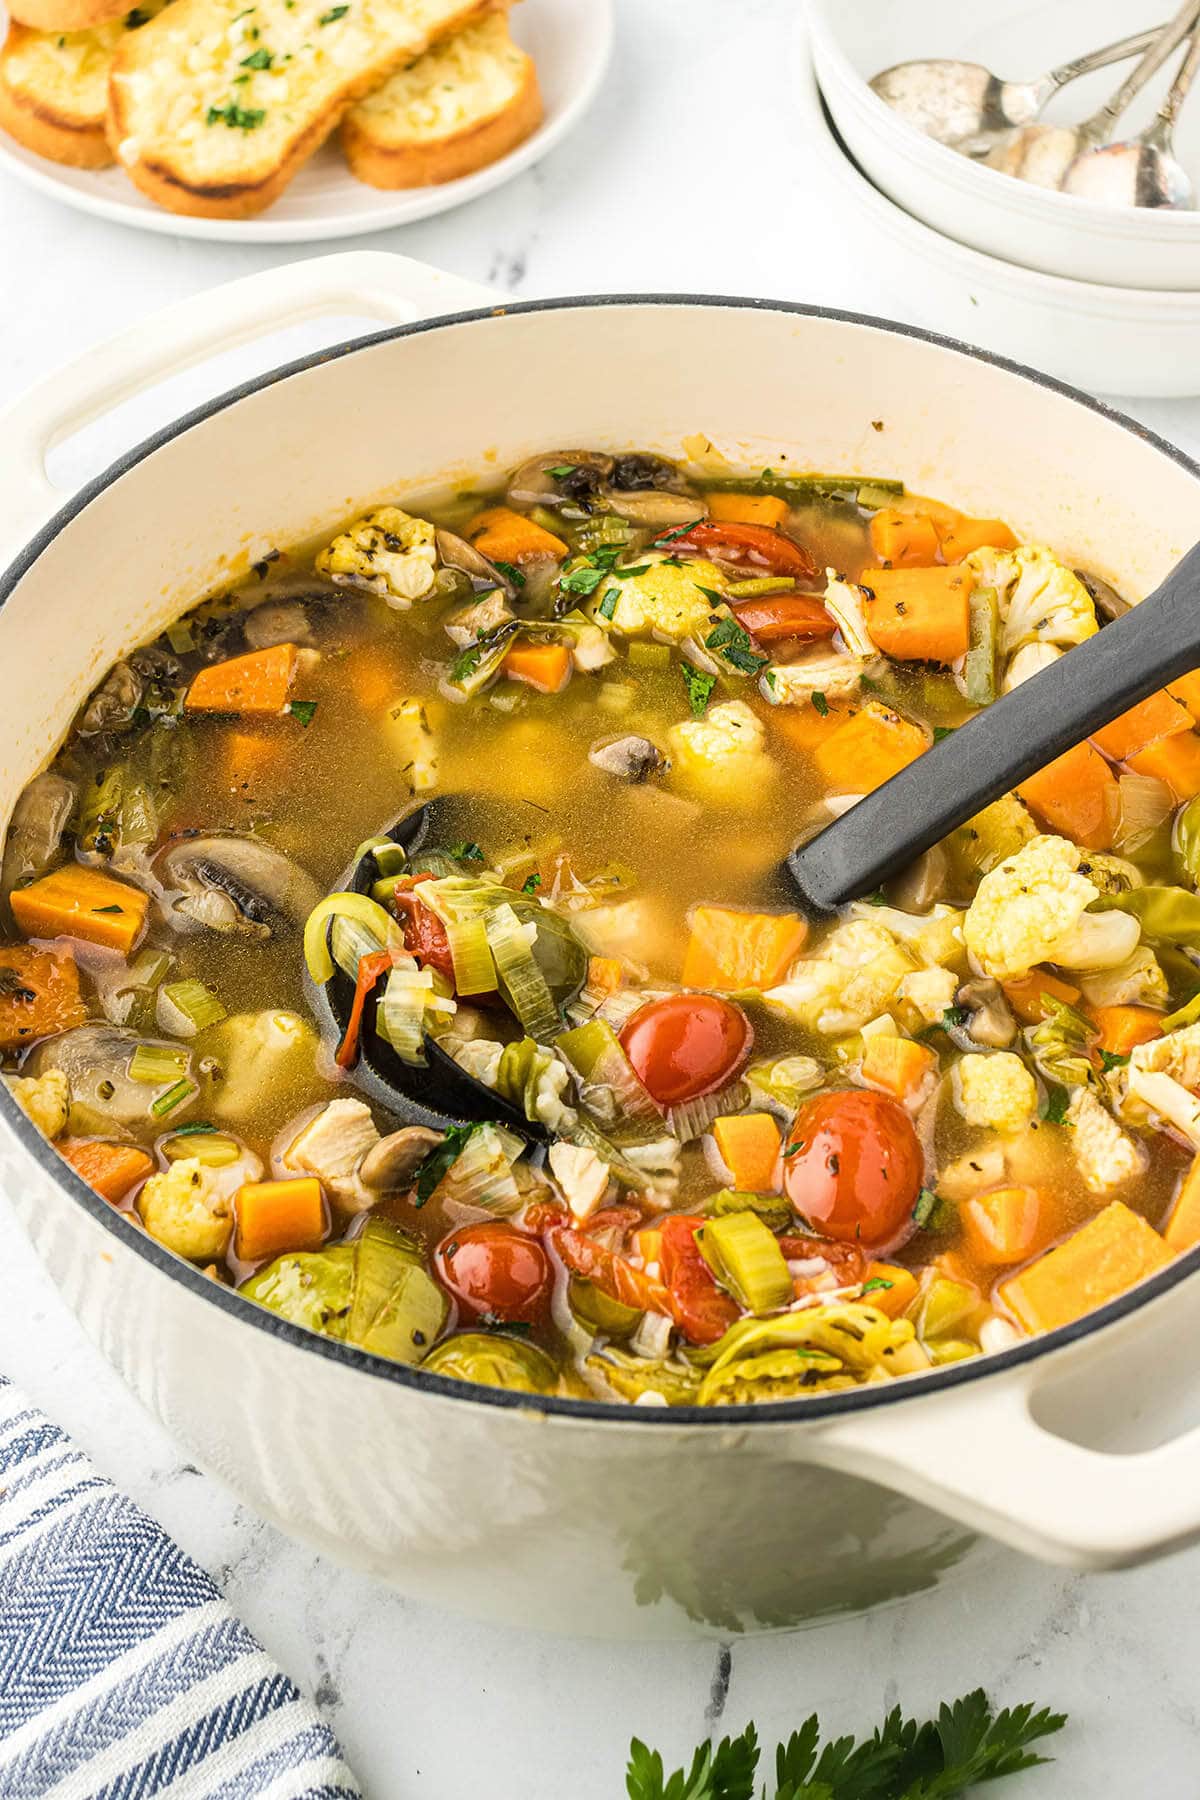 Leftover Turkey Soup with Root Vegetables - The Roasted Root